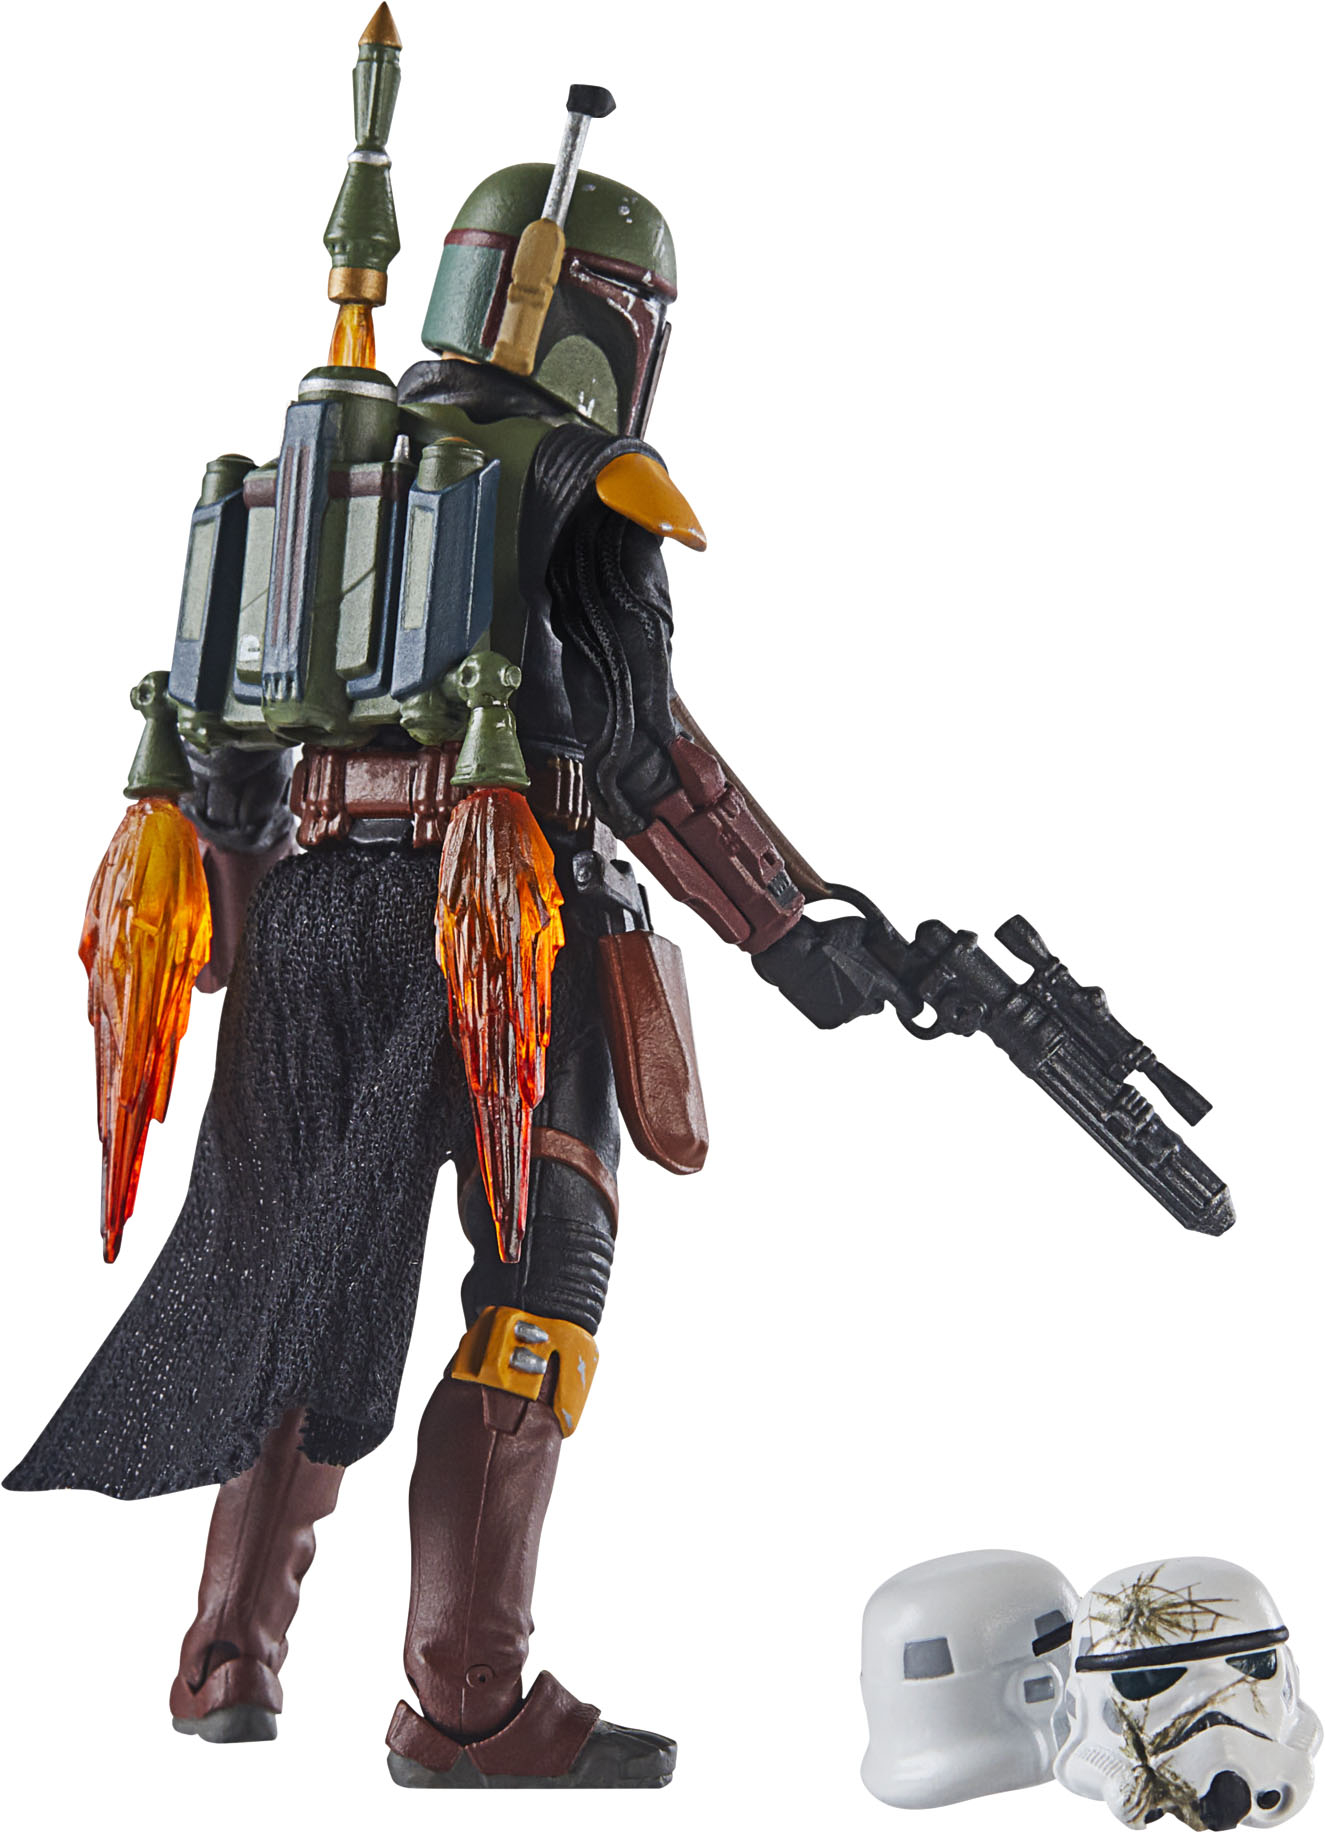 Angle View: Star Wars The Vintage Collection Deluxe Boba Fett (Tatooine)